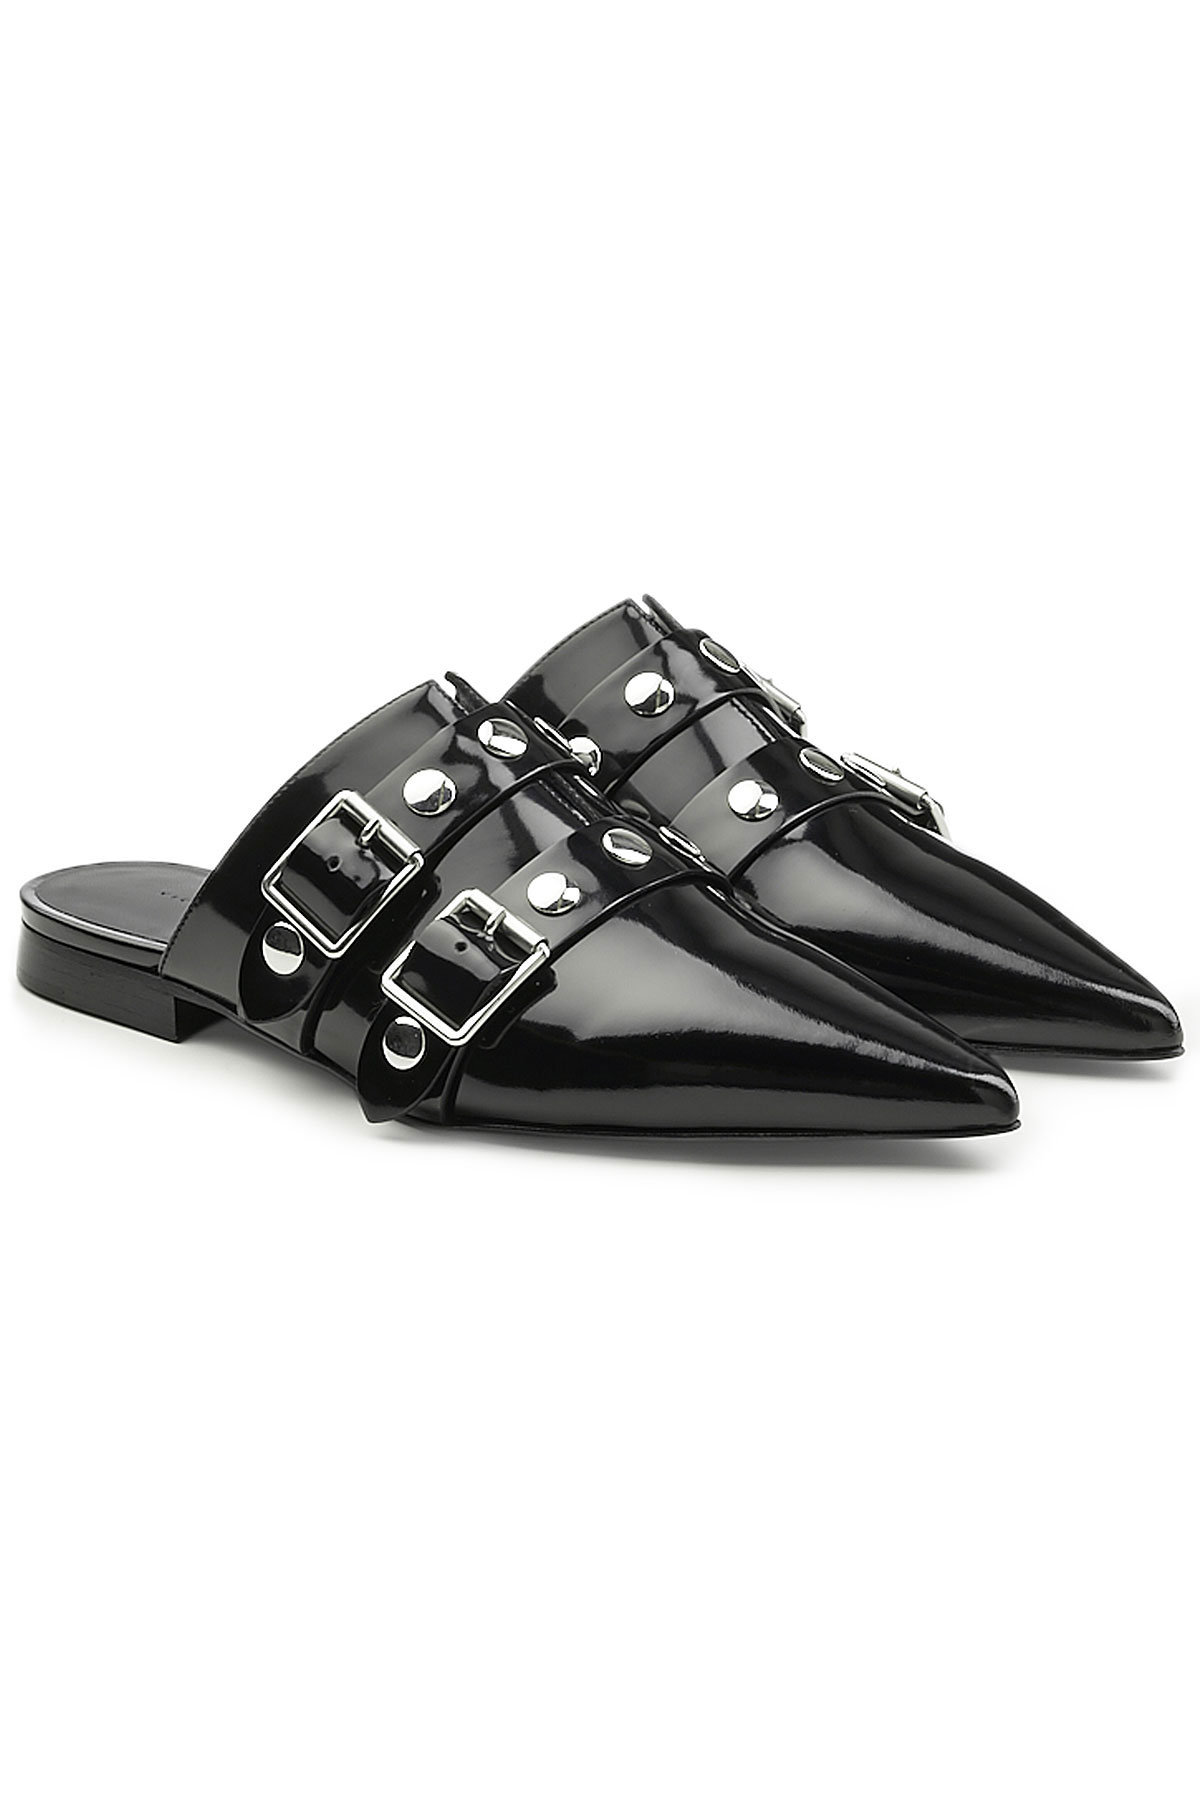 Victoria Beckham - Embellished Patent Leather Mules